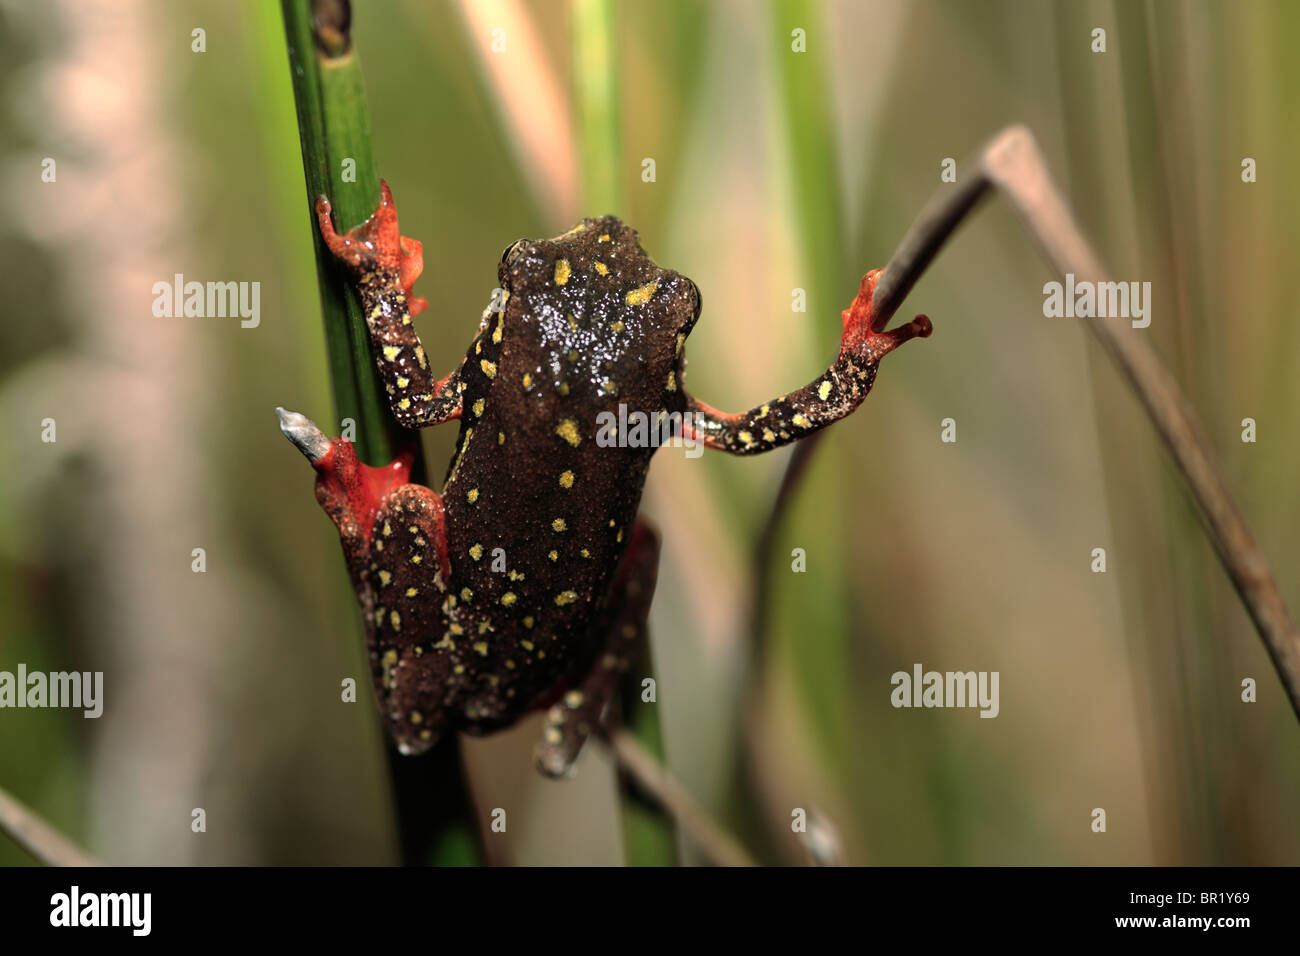 Painted reed frog Stock Photo